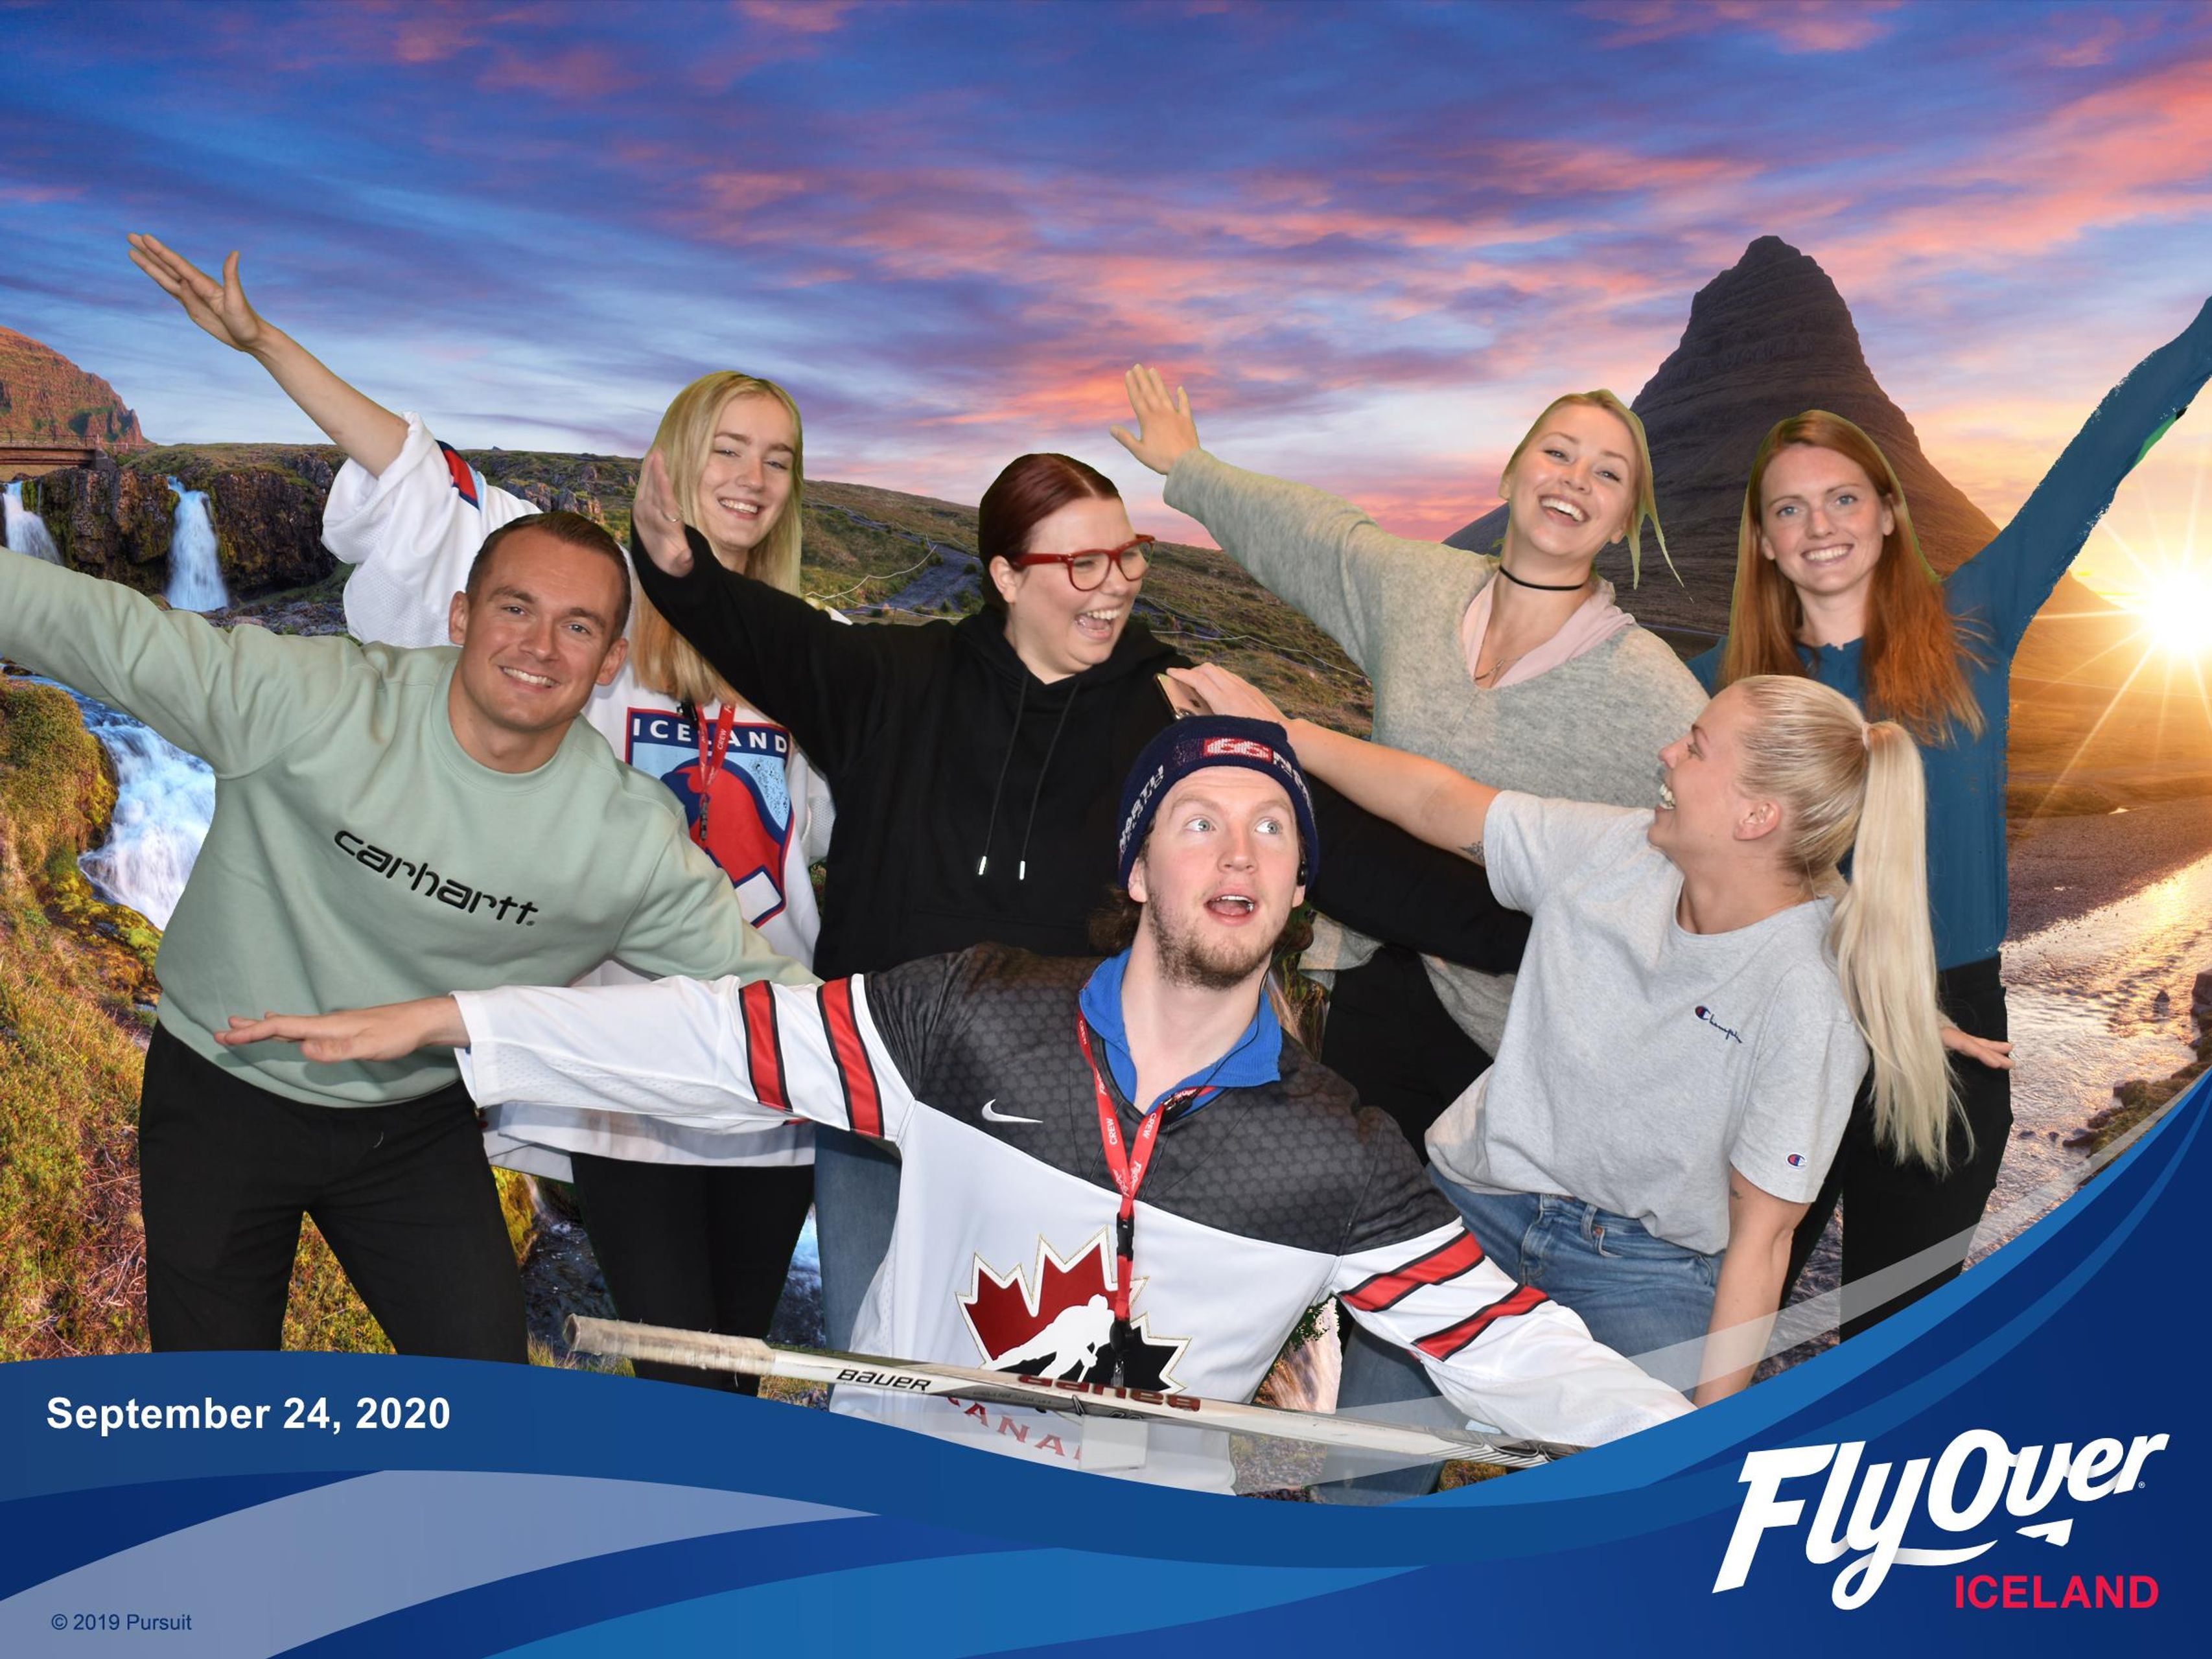 Staff at flyover iceland taking a photo of them flying